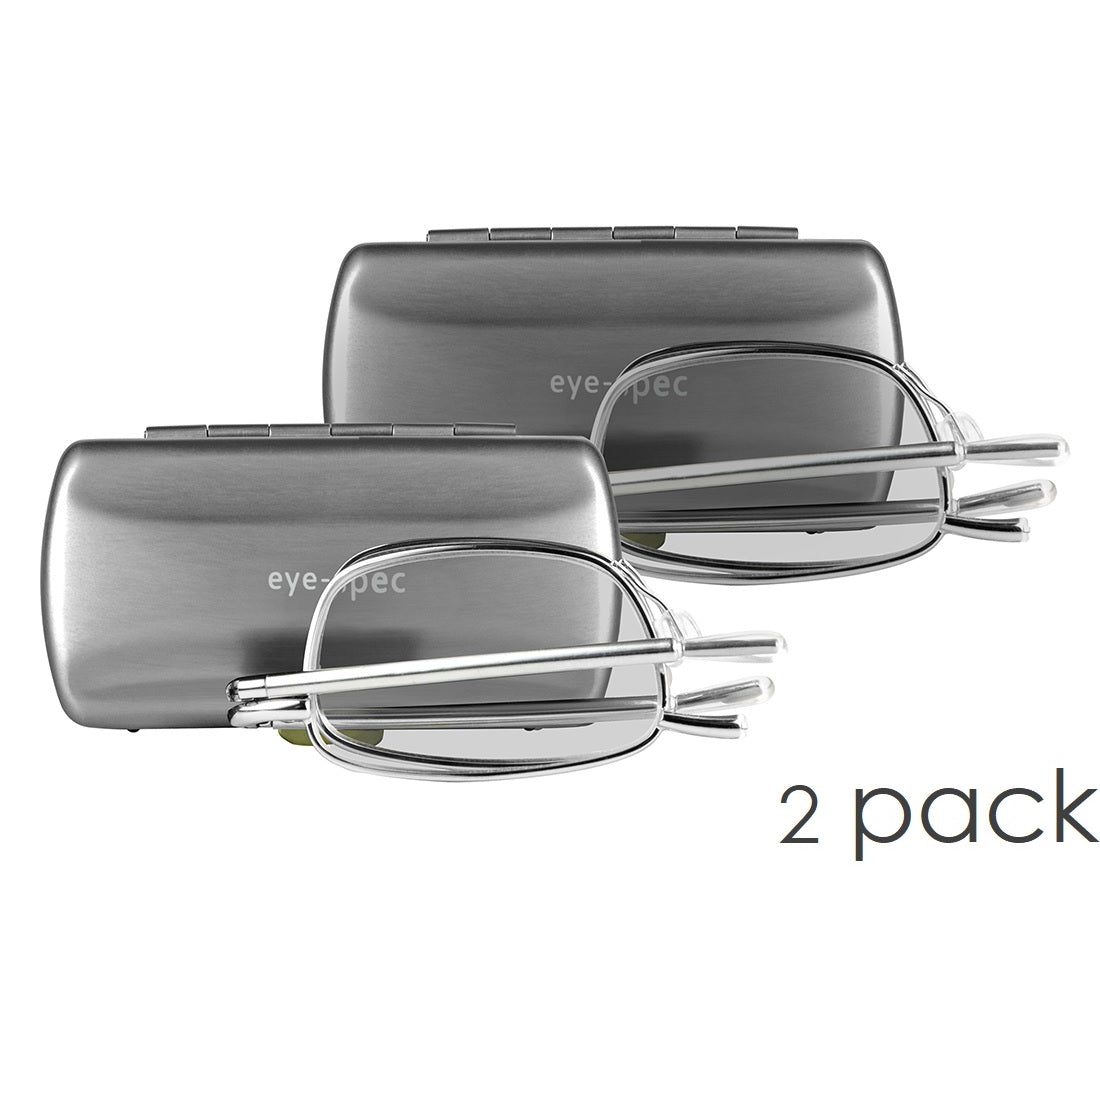 eye-look duo (2 Pairs) | ultra-light foldable spectacles with compact metal case